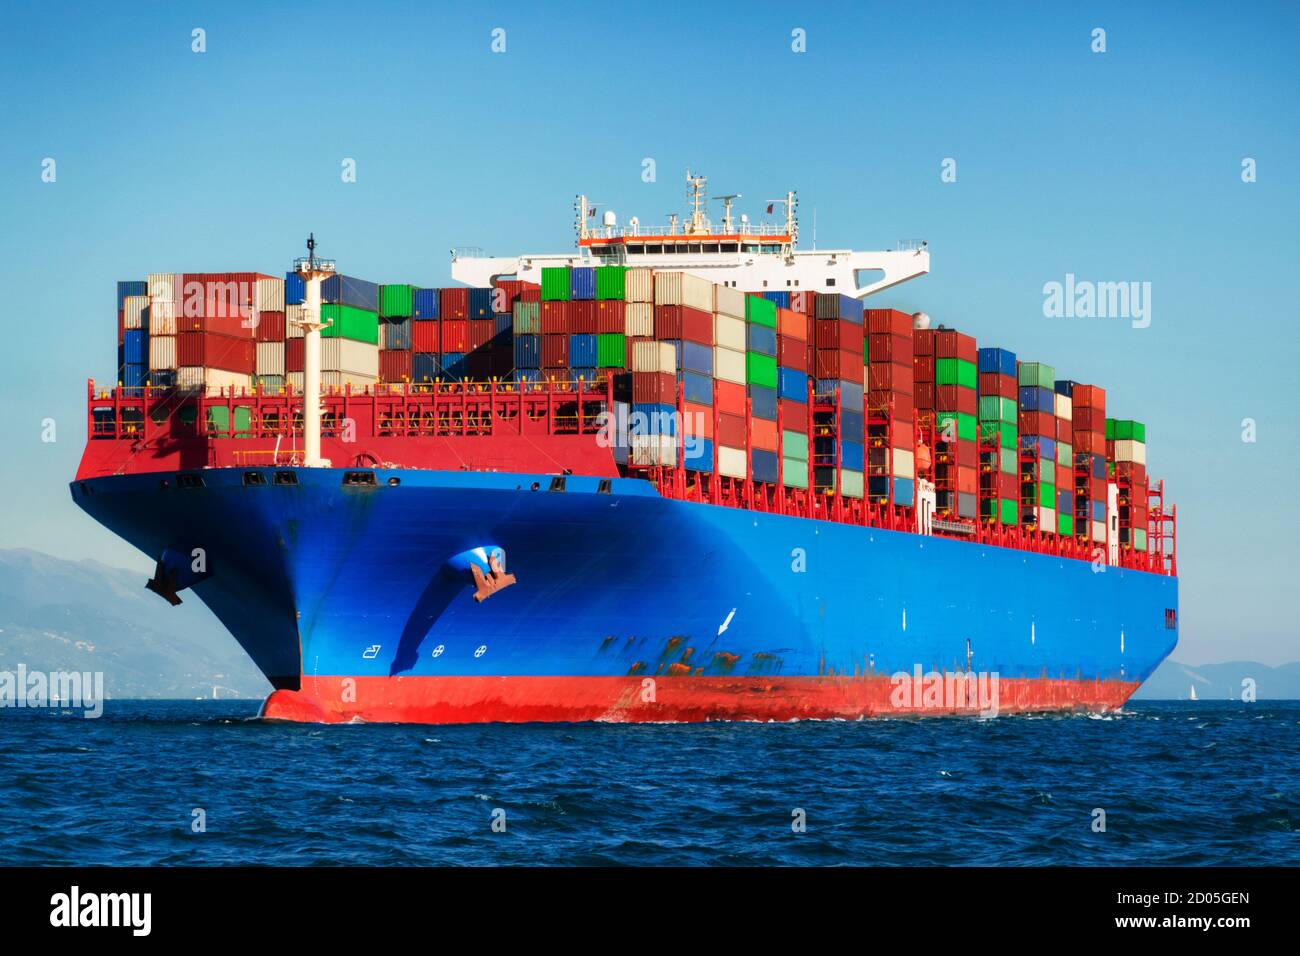 cargo container ship in import export business, commercial international trade logistic and transportation concept Stock Photo